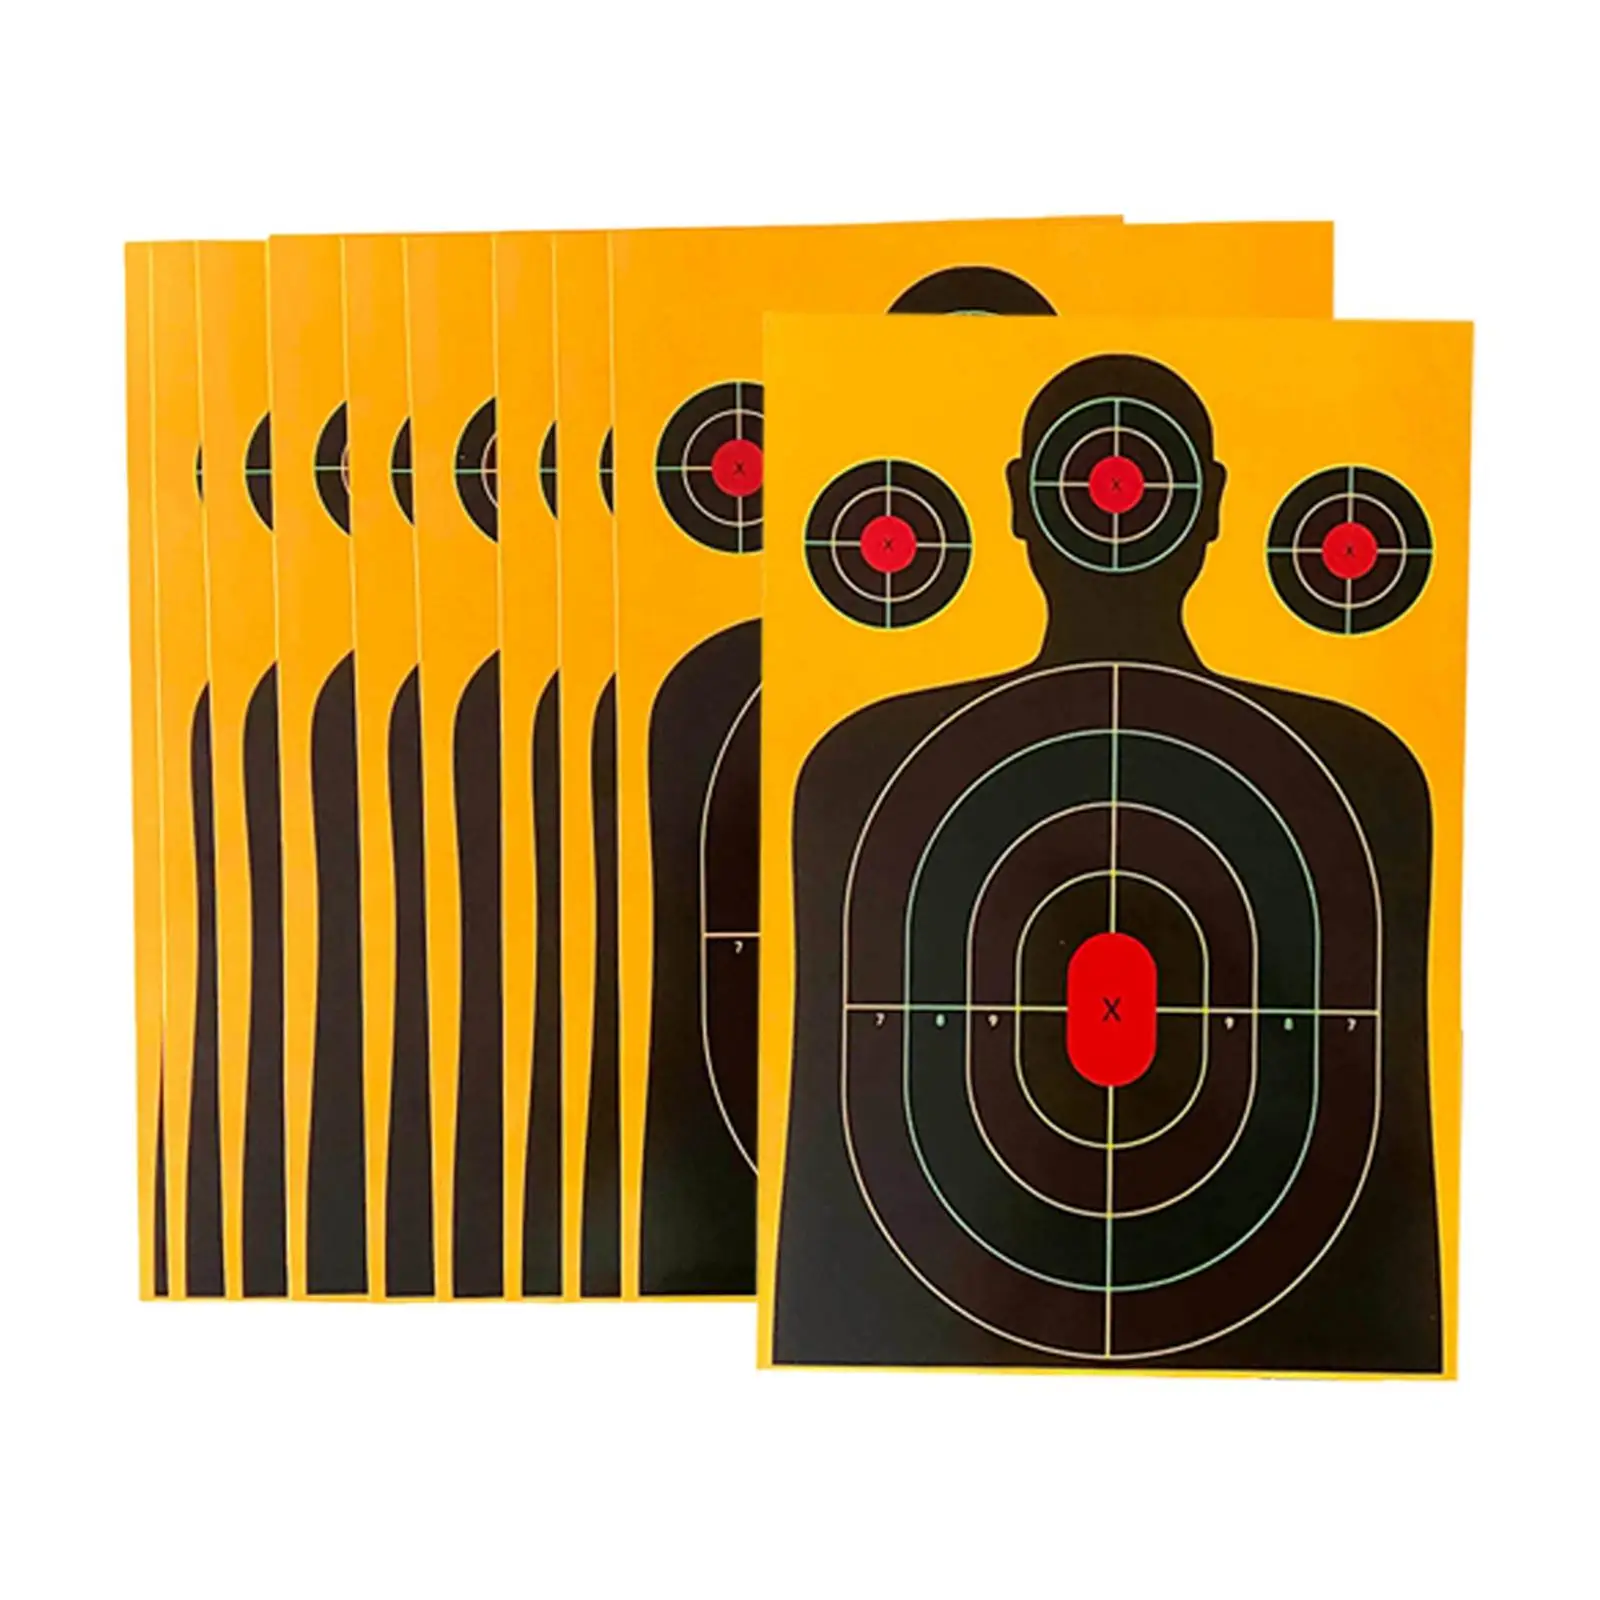 10 Pieces Silhouette Target Hunting Training Hunting Practice Durable Catapults Sport Professional Highly Visible Wargame Target